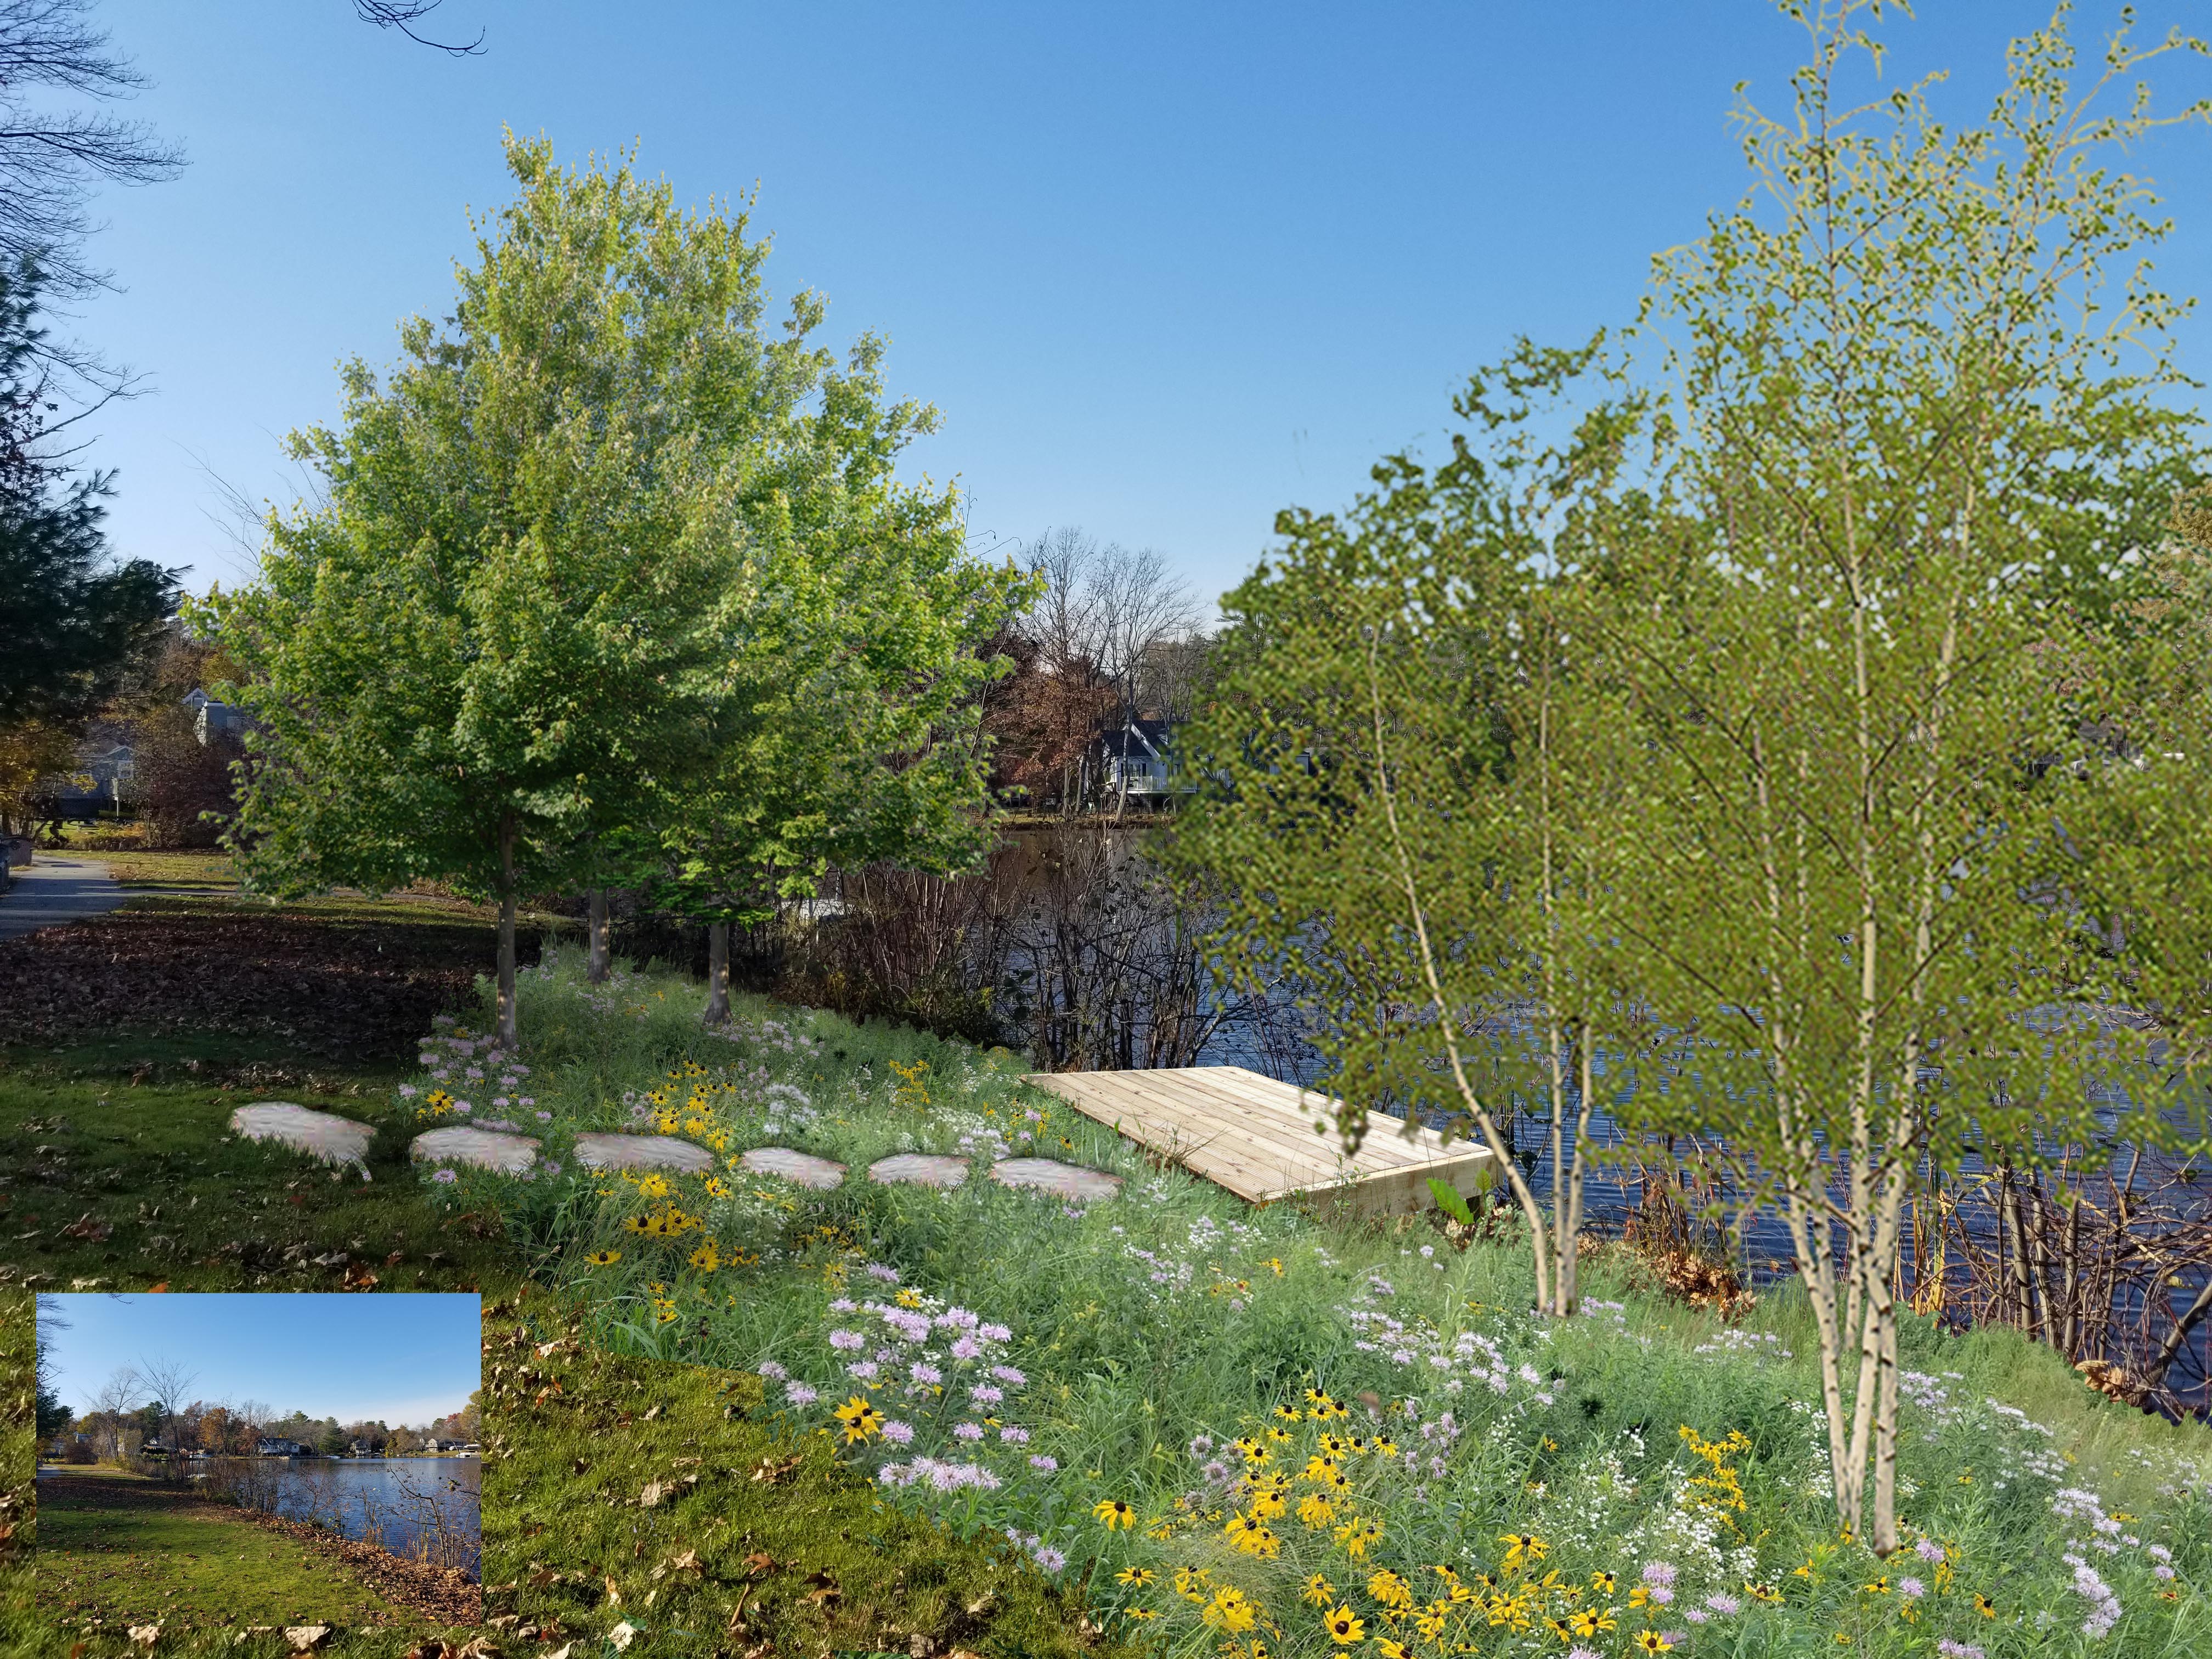 Maples, birches, wildflowers, and fishing platform added to pond edge